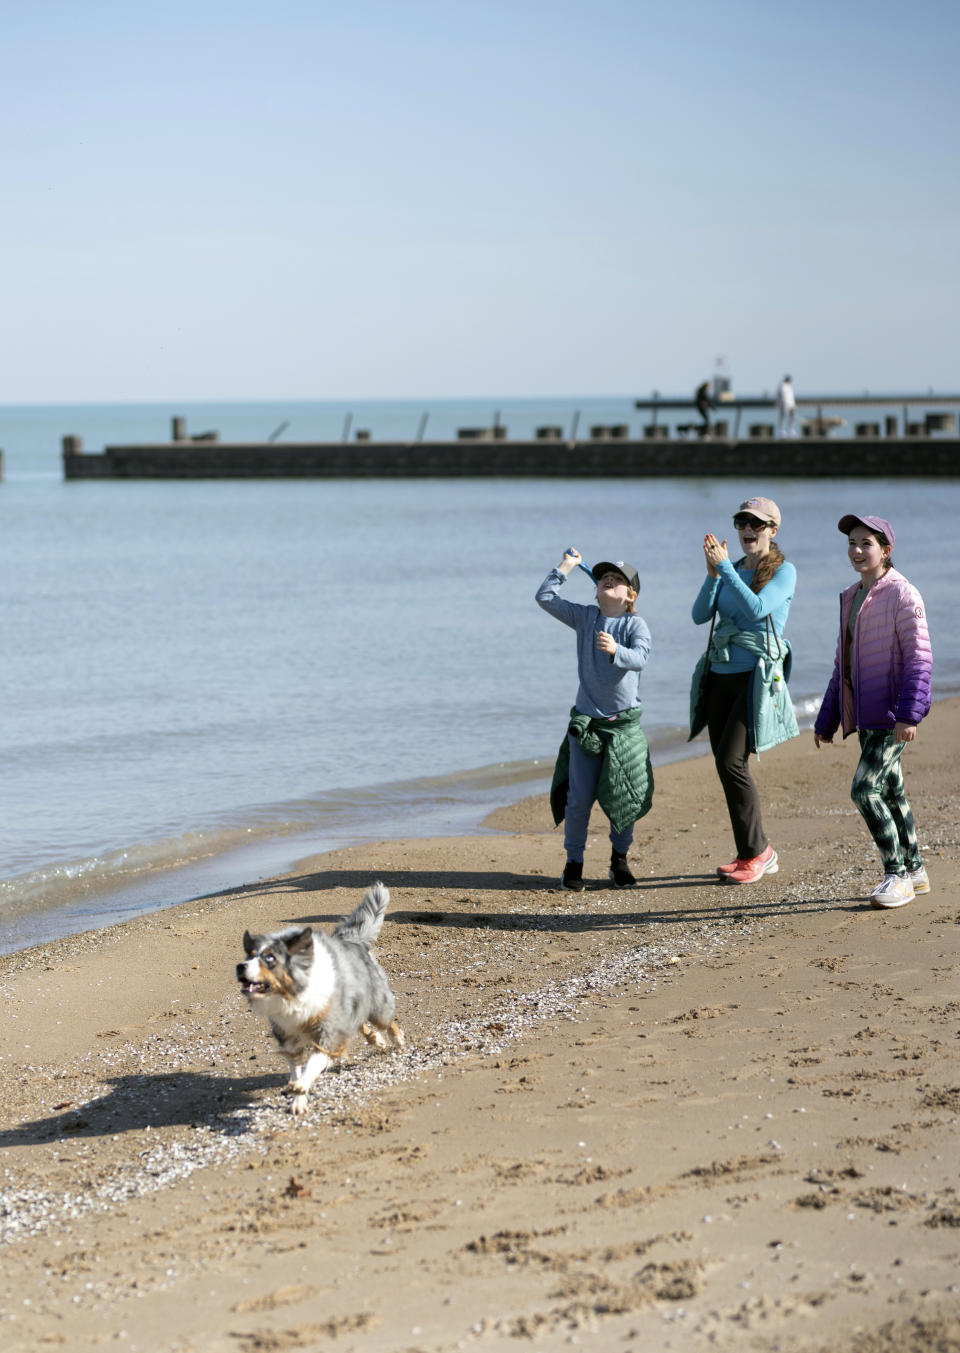 In this photo provided by Madeleine Beck, Maria Colavincenzo, center, strolls on the beach of Lake Michigan in Chicago, Sunday, Feb. 25, 2024, with her children, 7-year-old Patrick Galvin, left, and 11-year-old Eloise Galvin, right, and their dog, Greta. They joined throngs of people who turned out to enjoy warmer-than-usual weather. While temperatures usually hover around freezing in late February, they reached into the 60s in Chicago and other Midwest cities. (Madeleine Beck via AP)